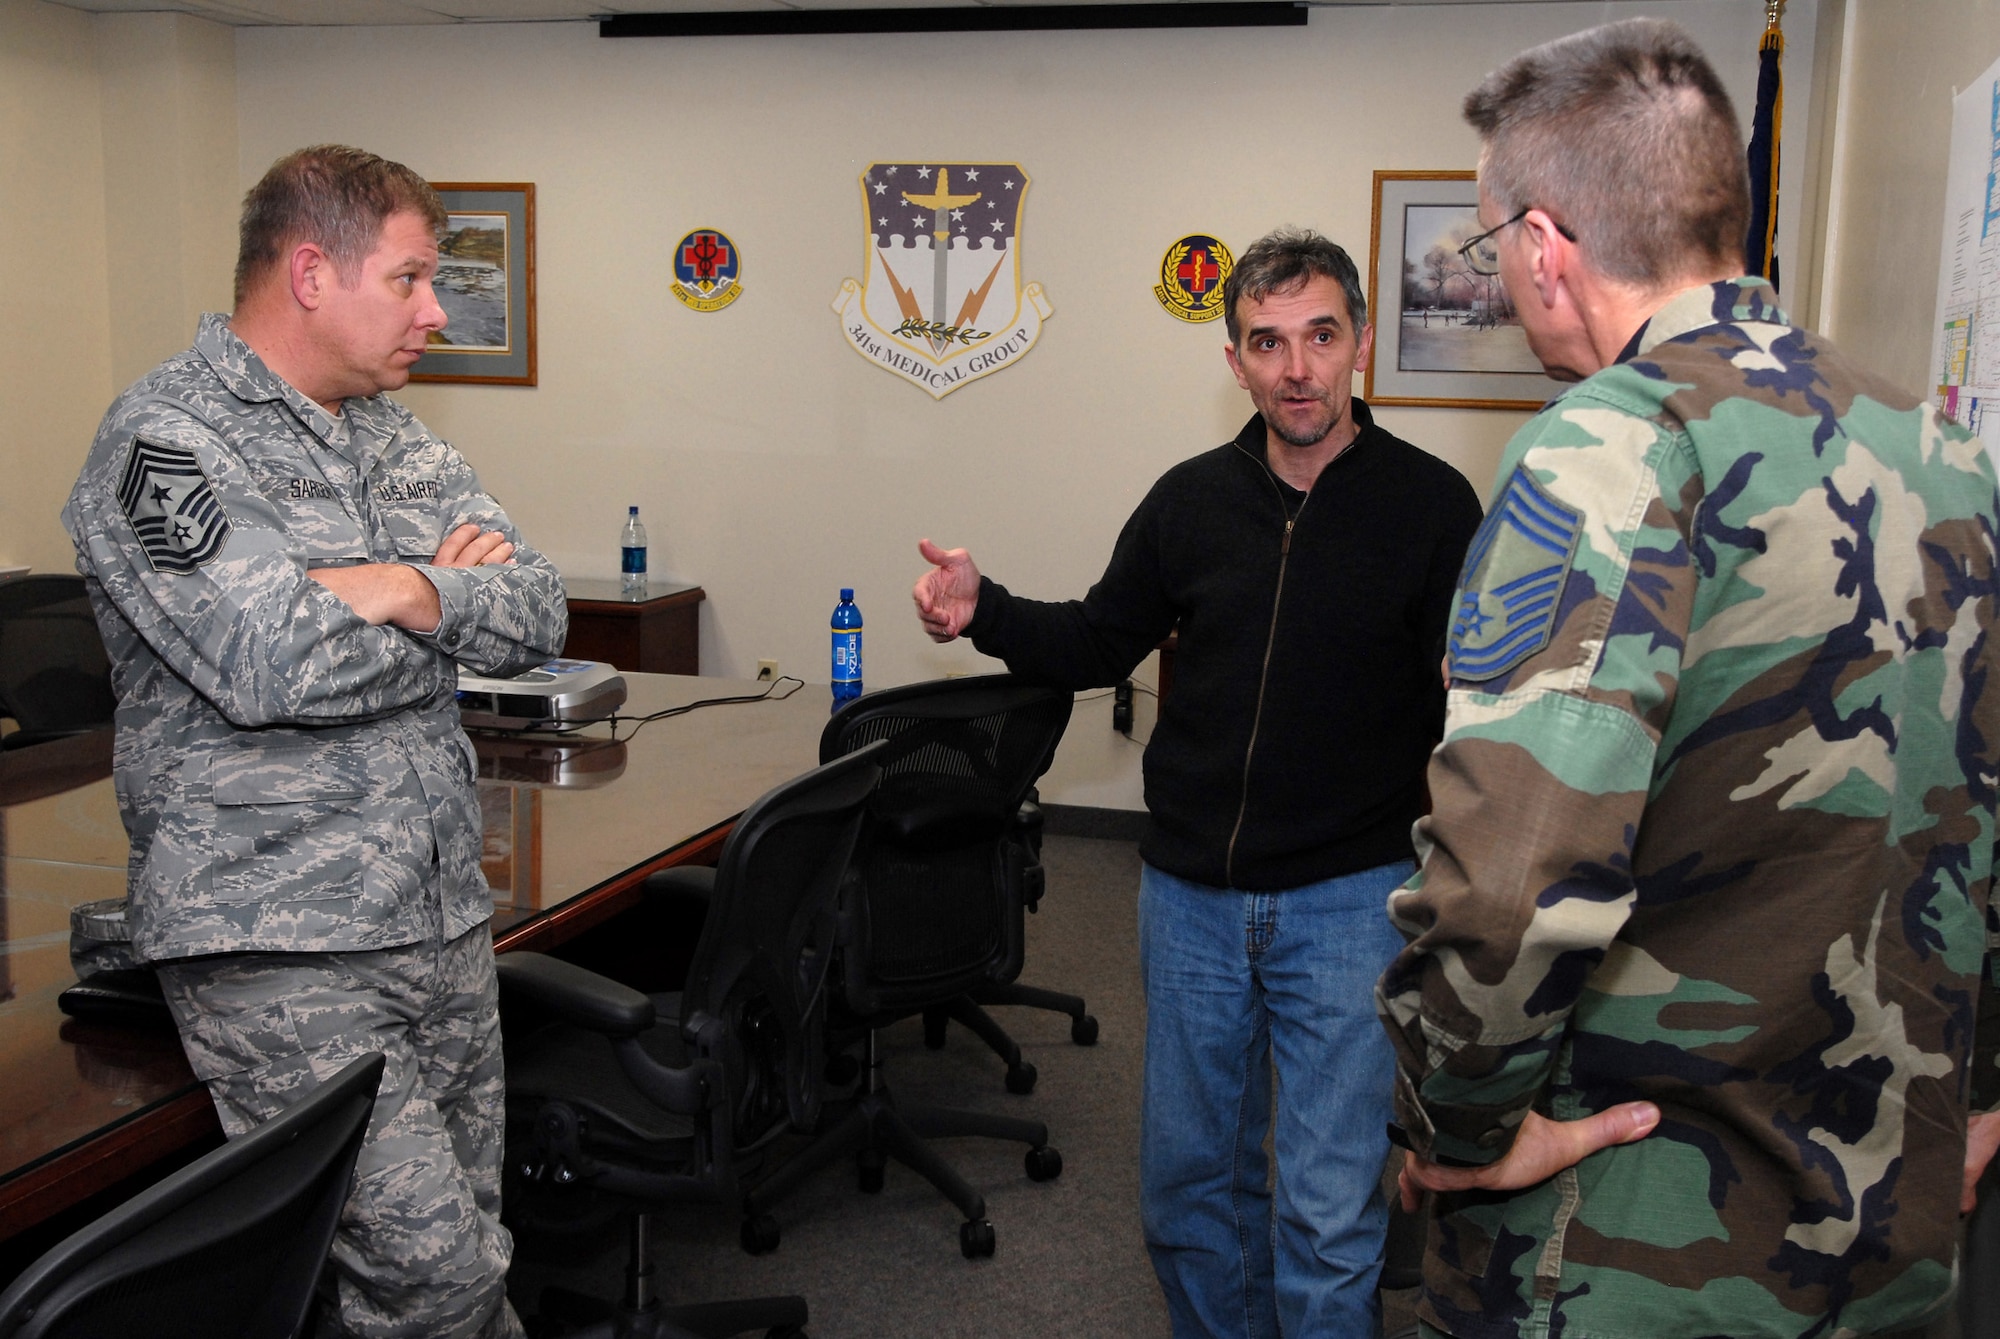 Chief Master Sgt. Steve Sargent, 341st Space Wing command chief, and Chief Master Sgt. Richard Riddle, 341st Medical Group superintendent, speak with John Underwood, president and founder of the American Athletic Institute, following a presentation he gave on the negative physiological effects of alcohol on athletes and Airmen whose motto is “Fit to Fight” April 1. (U.S. Air Force photo/John Turner)